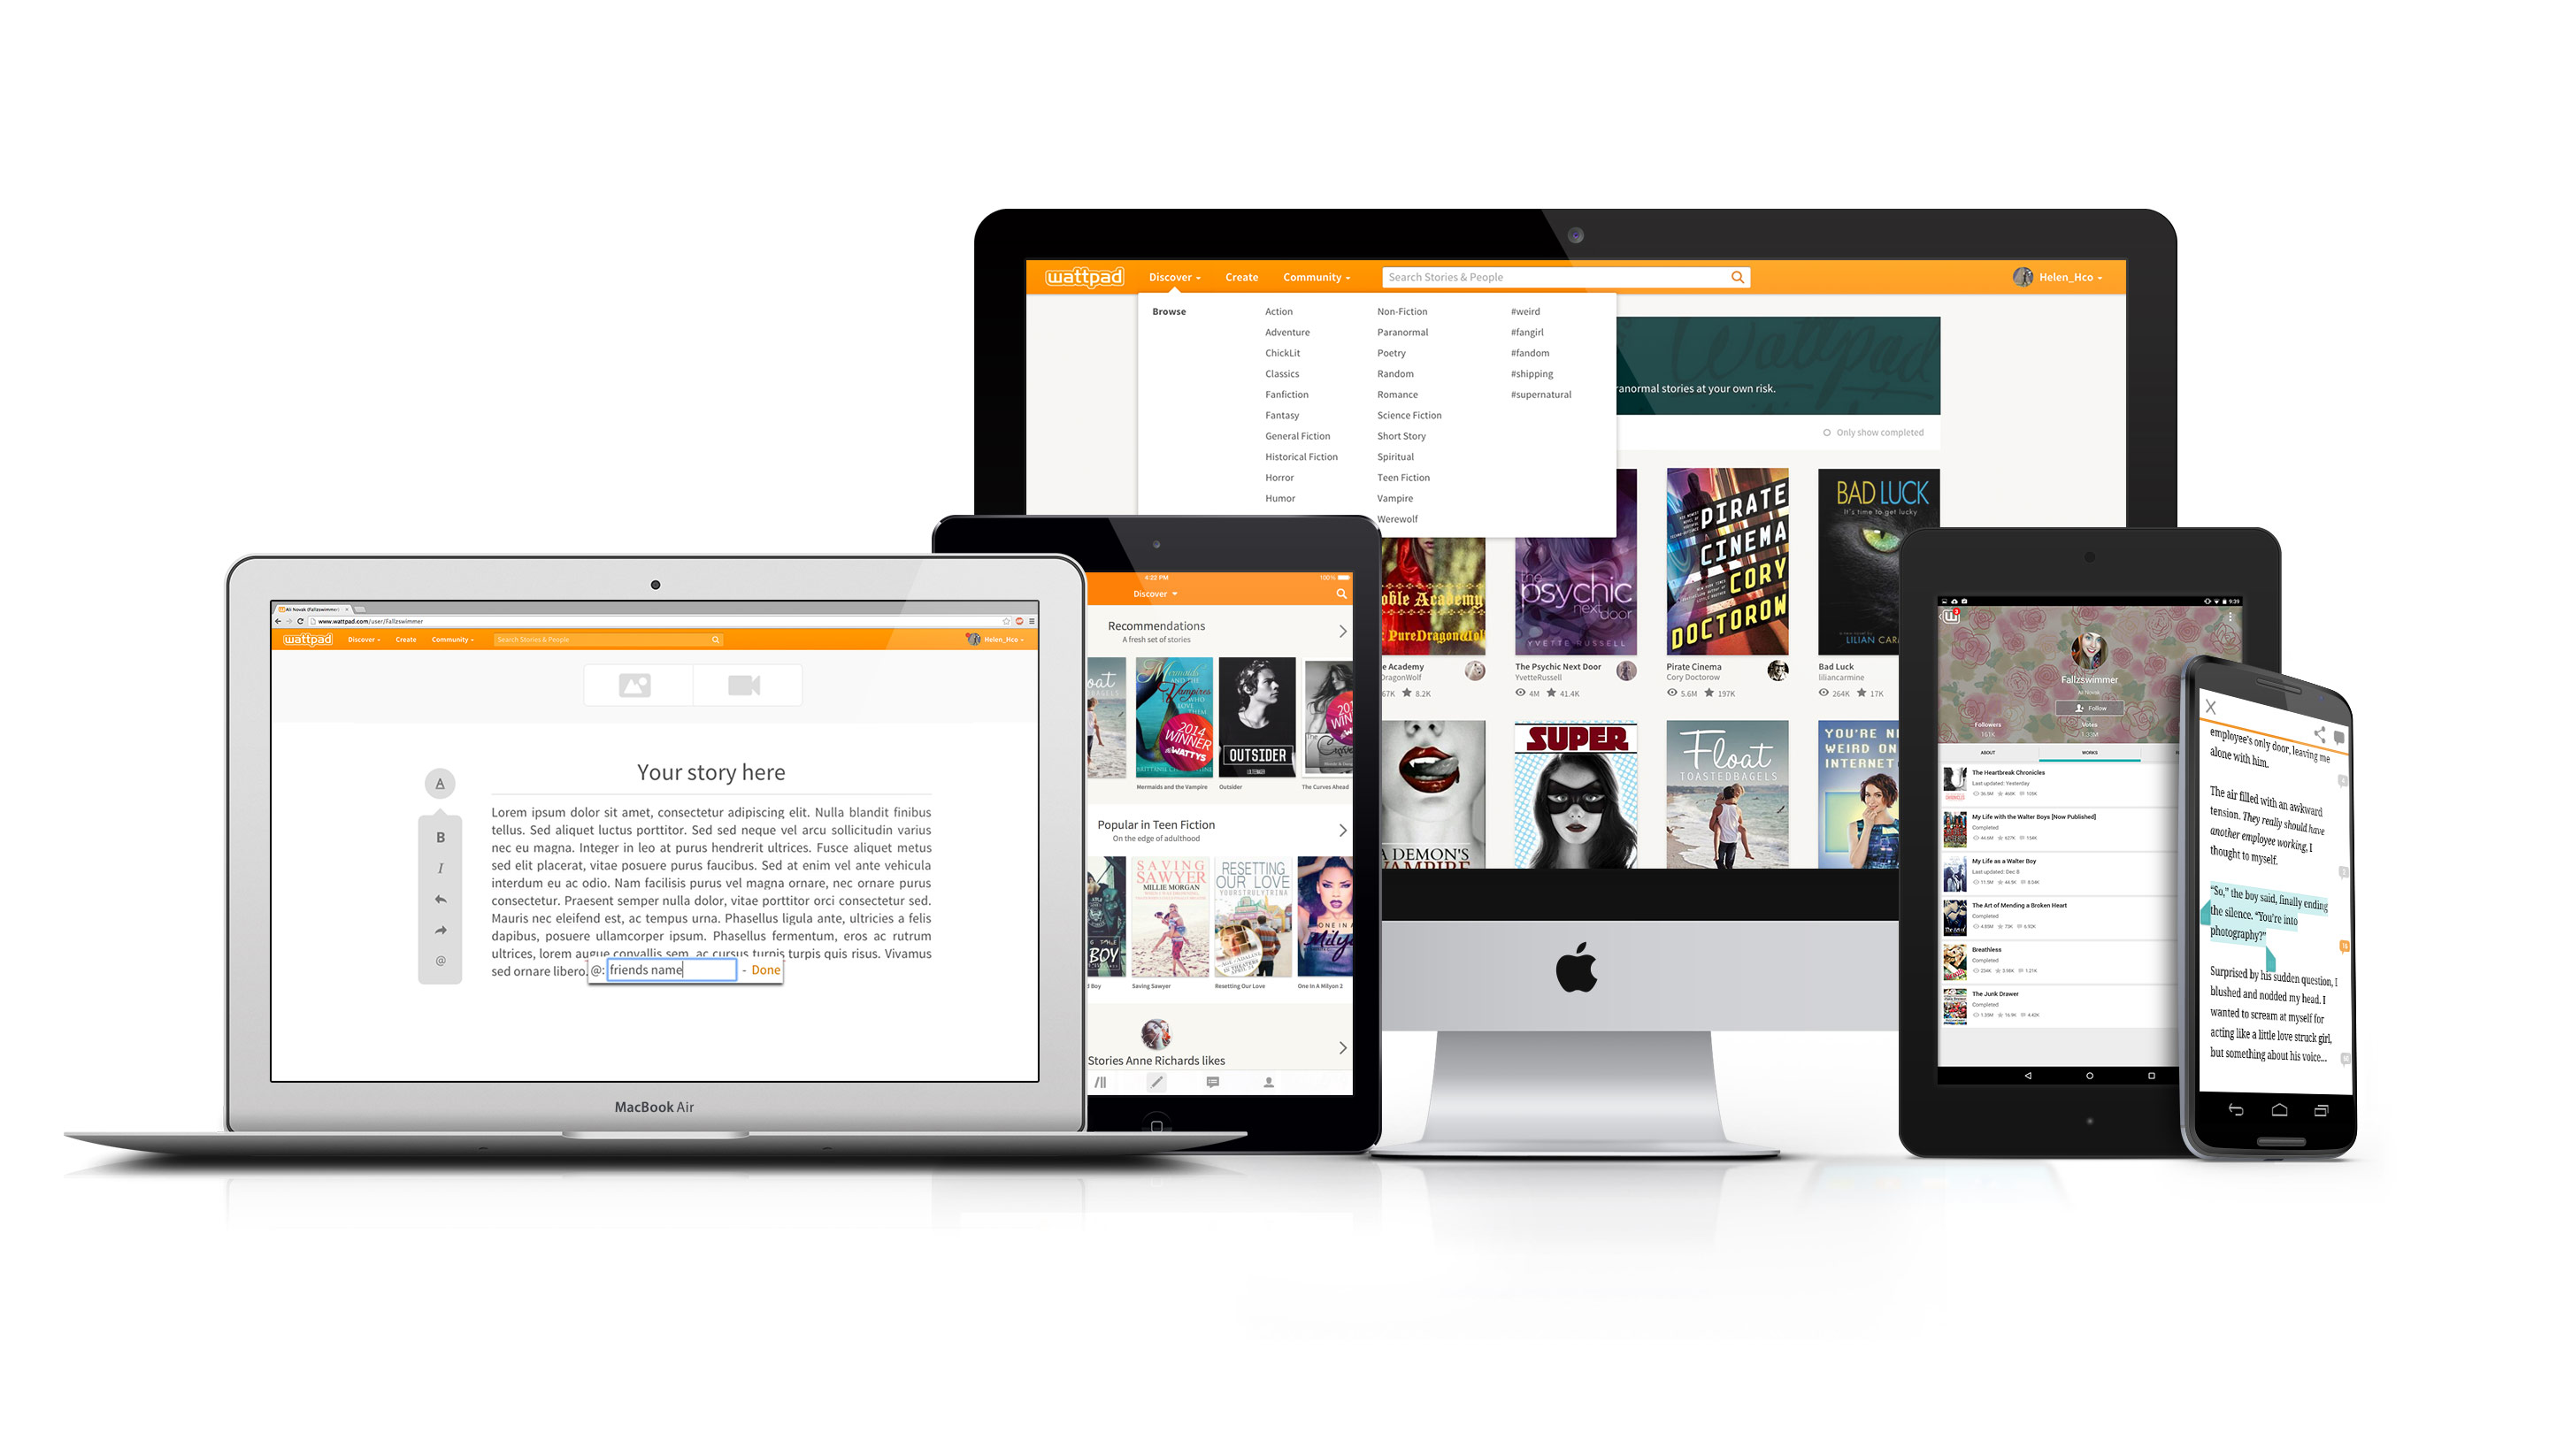 Wattpad’s storytelling app, now with 60M monthly users, adds a subscription service